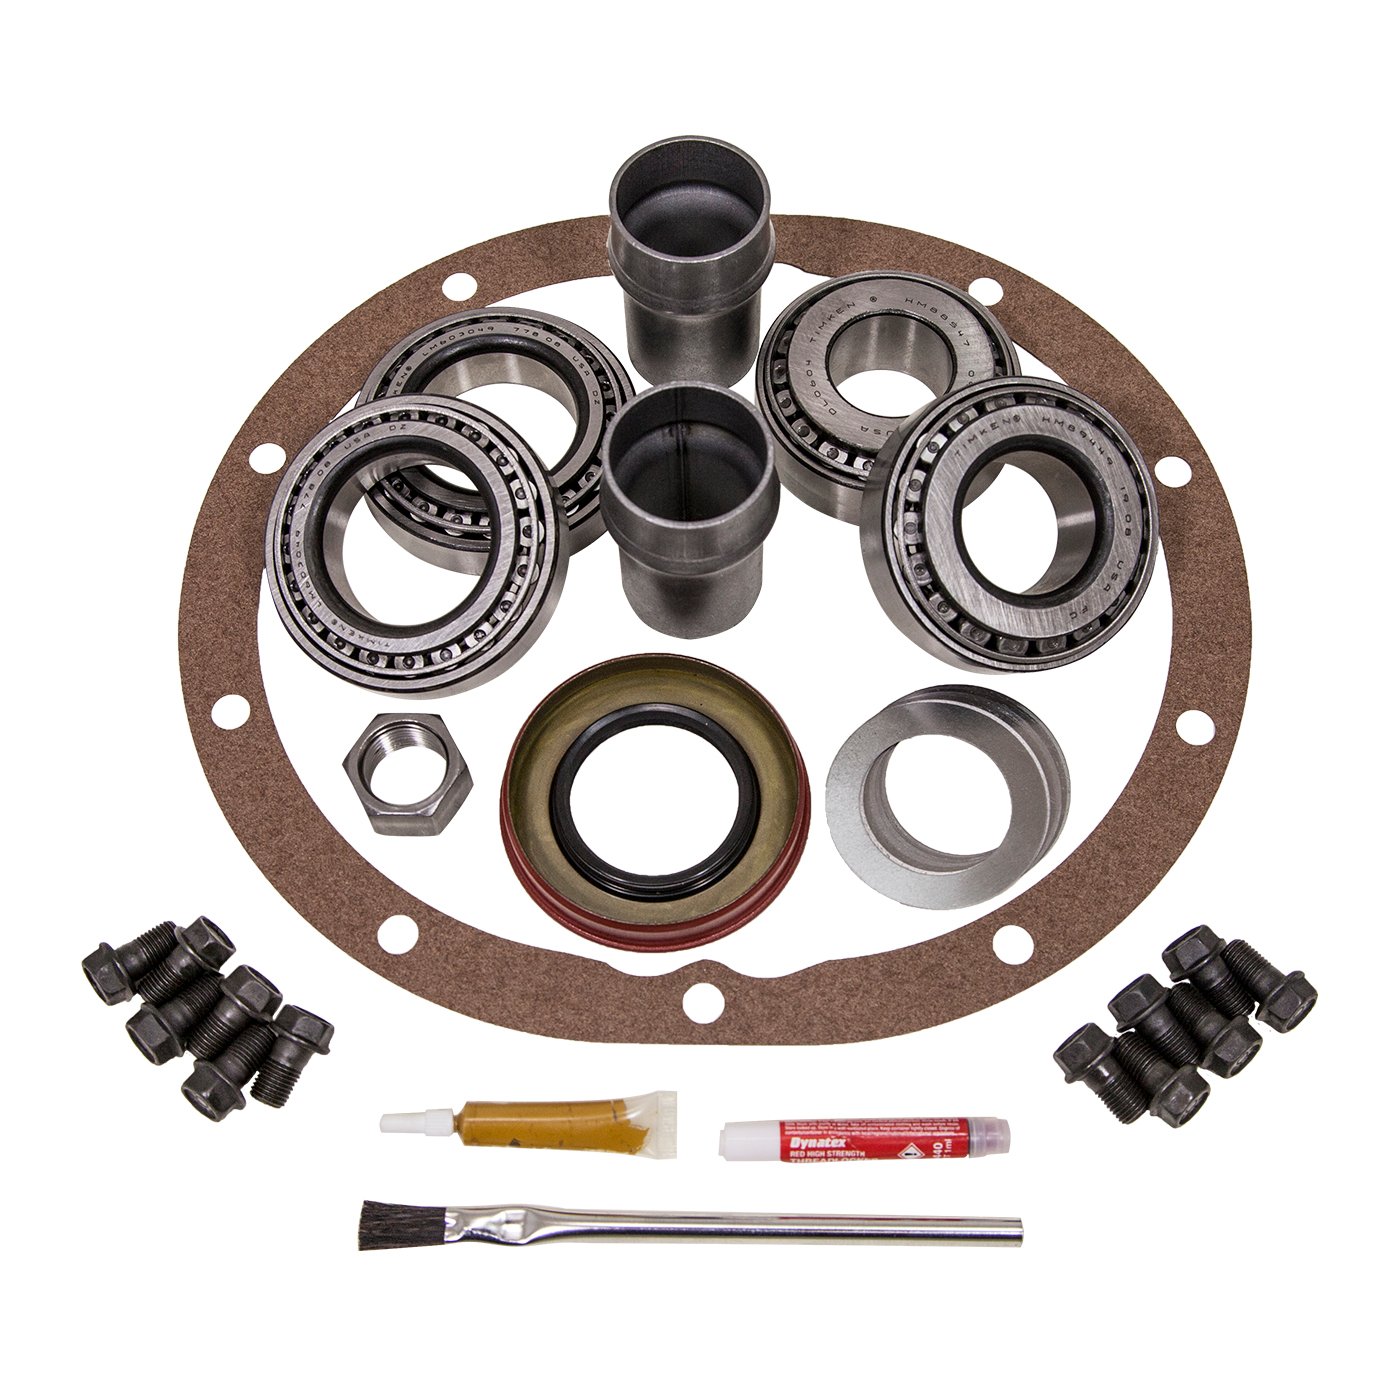 USA Standard 37047 Master Overhaul Kit, For GM Chevy 55P And 55T Differential